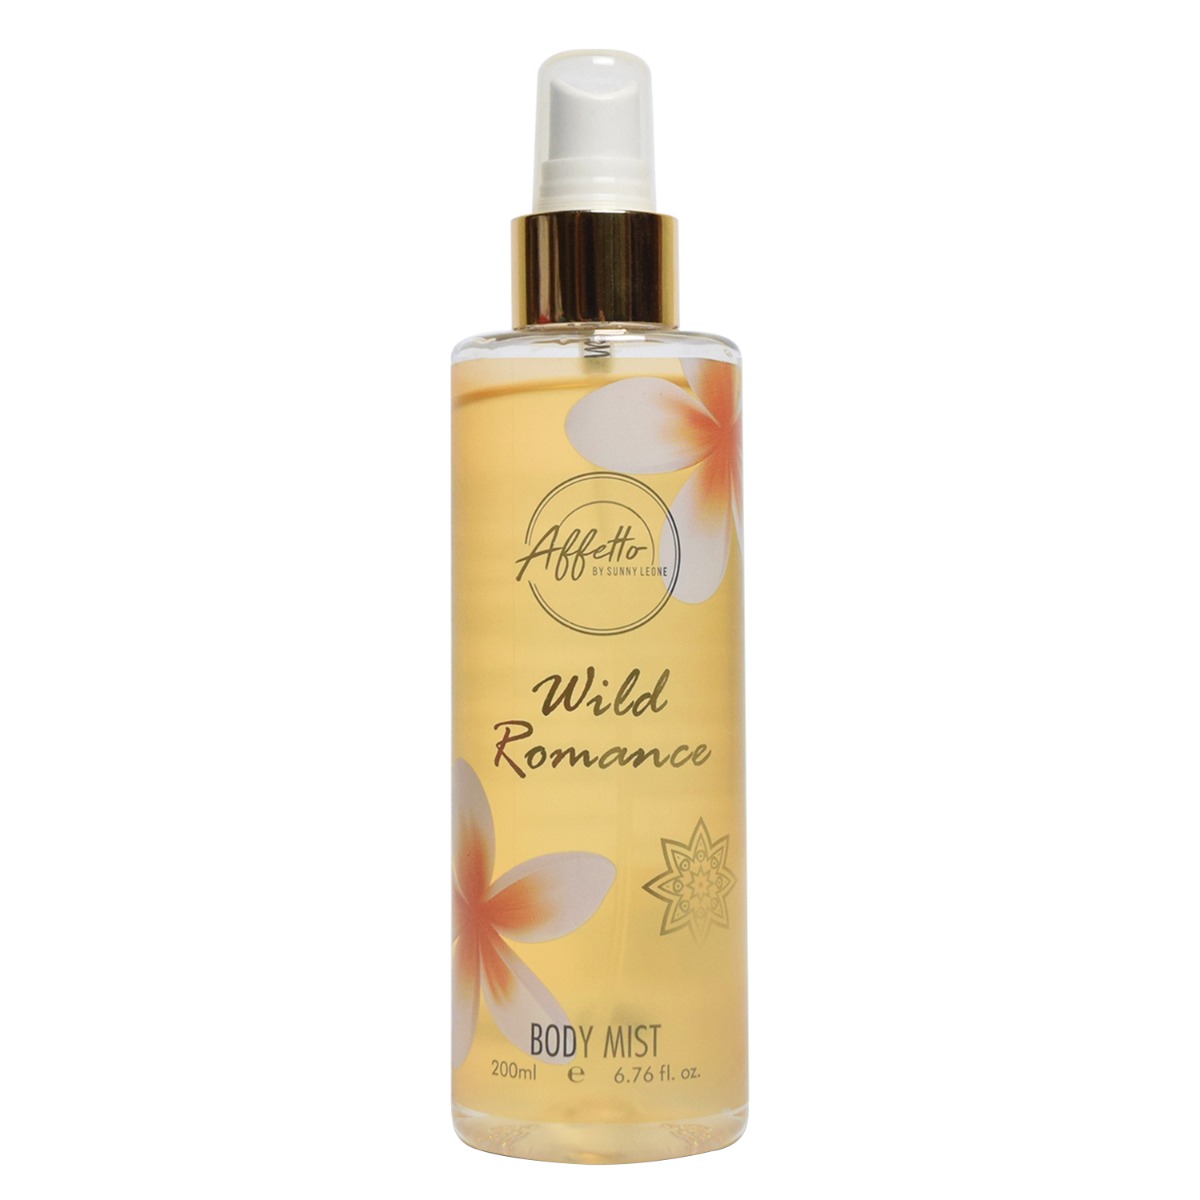 Star Struck by Sunny Leone Affetto by Sunny Leone Body Mist for Her - Wild Romance, 200ml